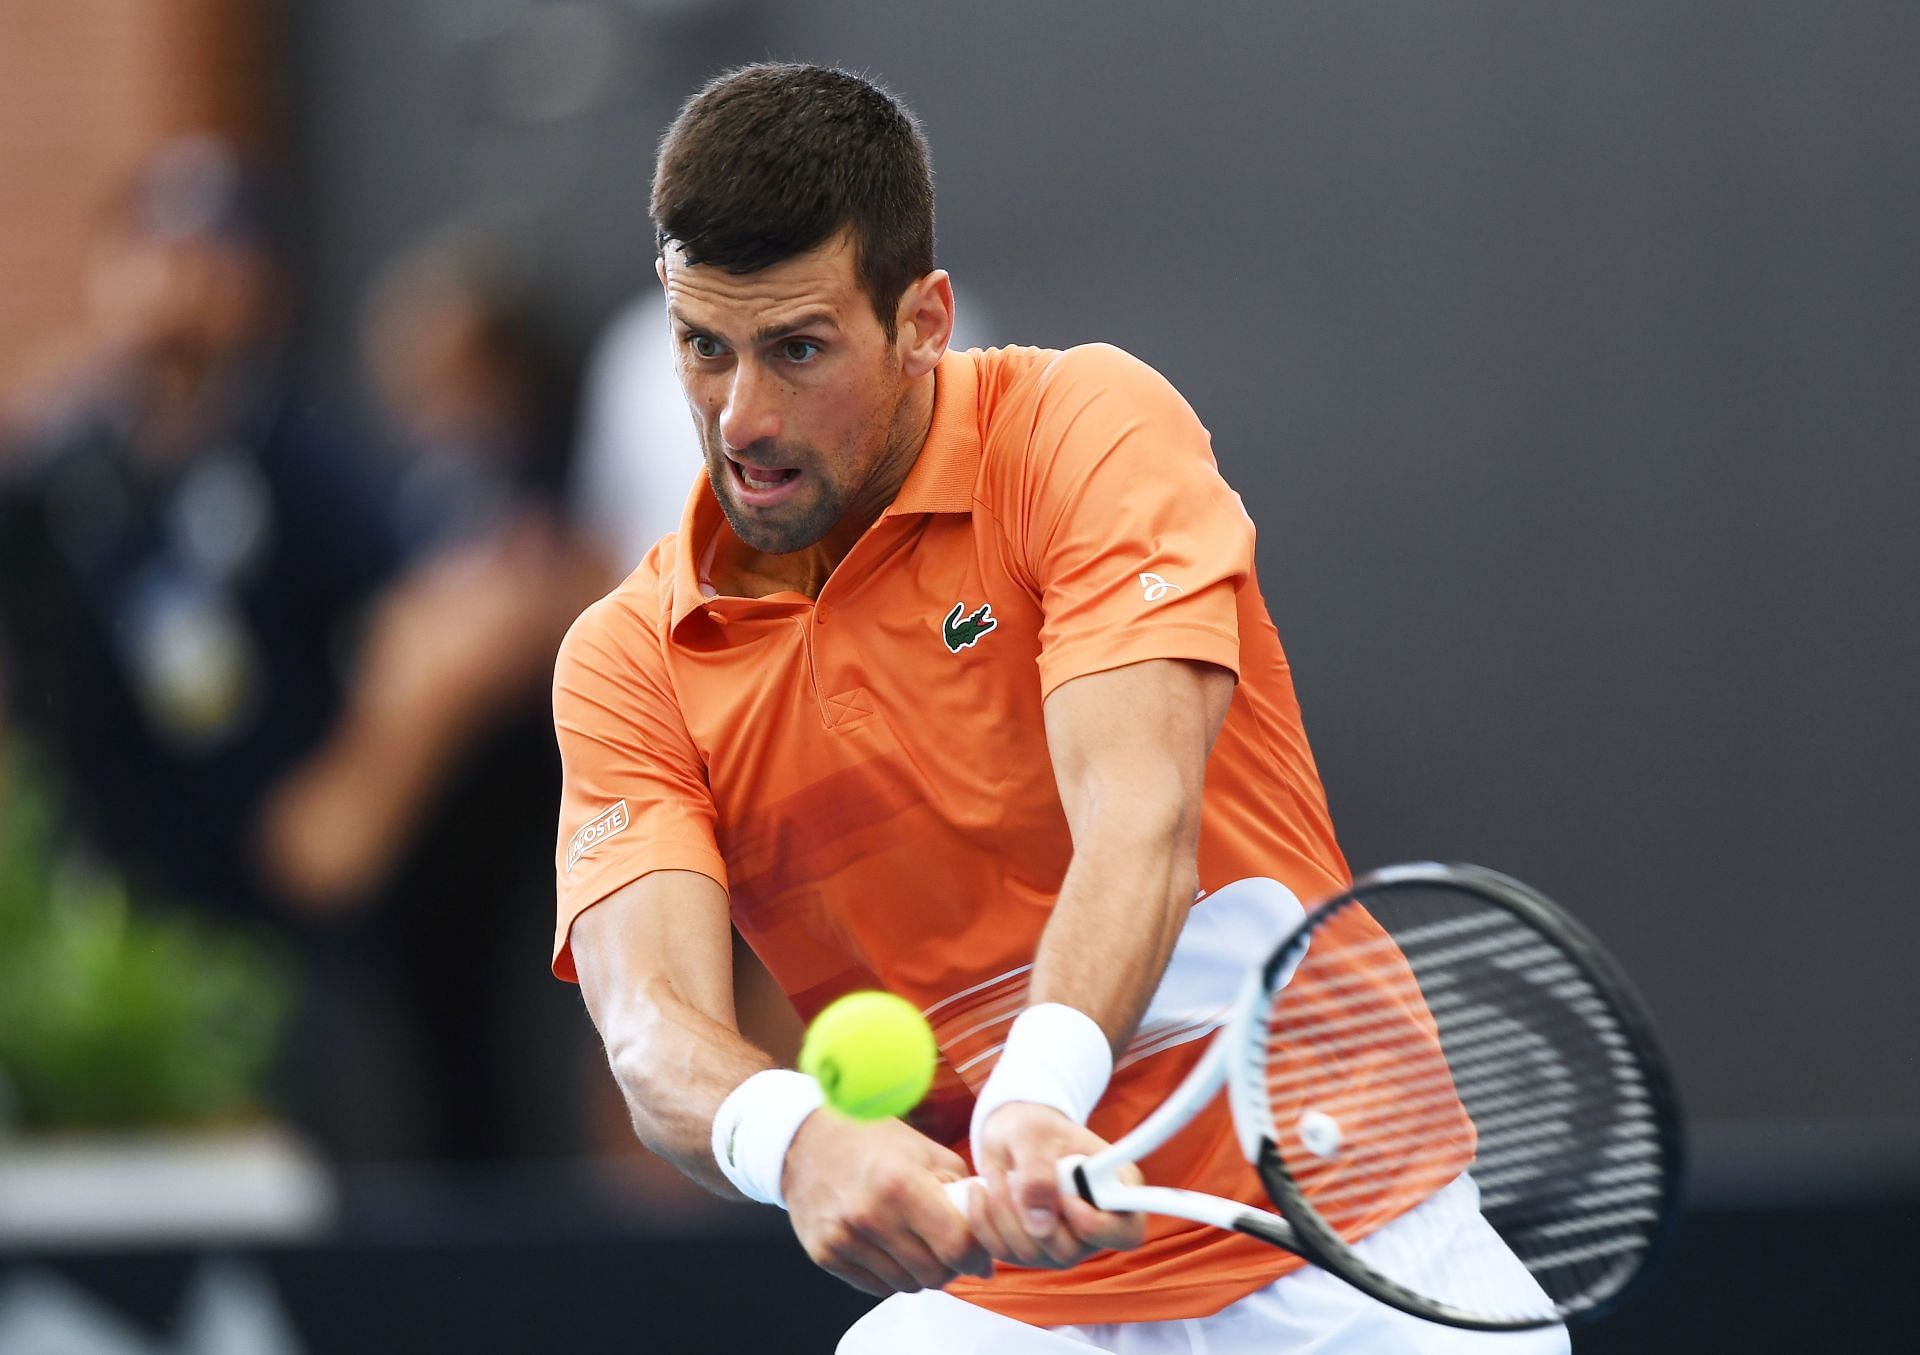 Novak Djokovic in action against Constant Lestienne at the 2023 Adelaide International 1.